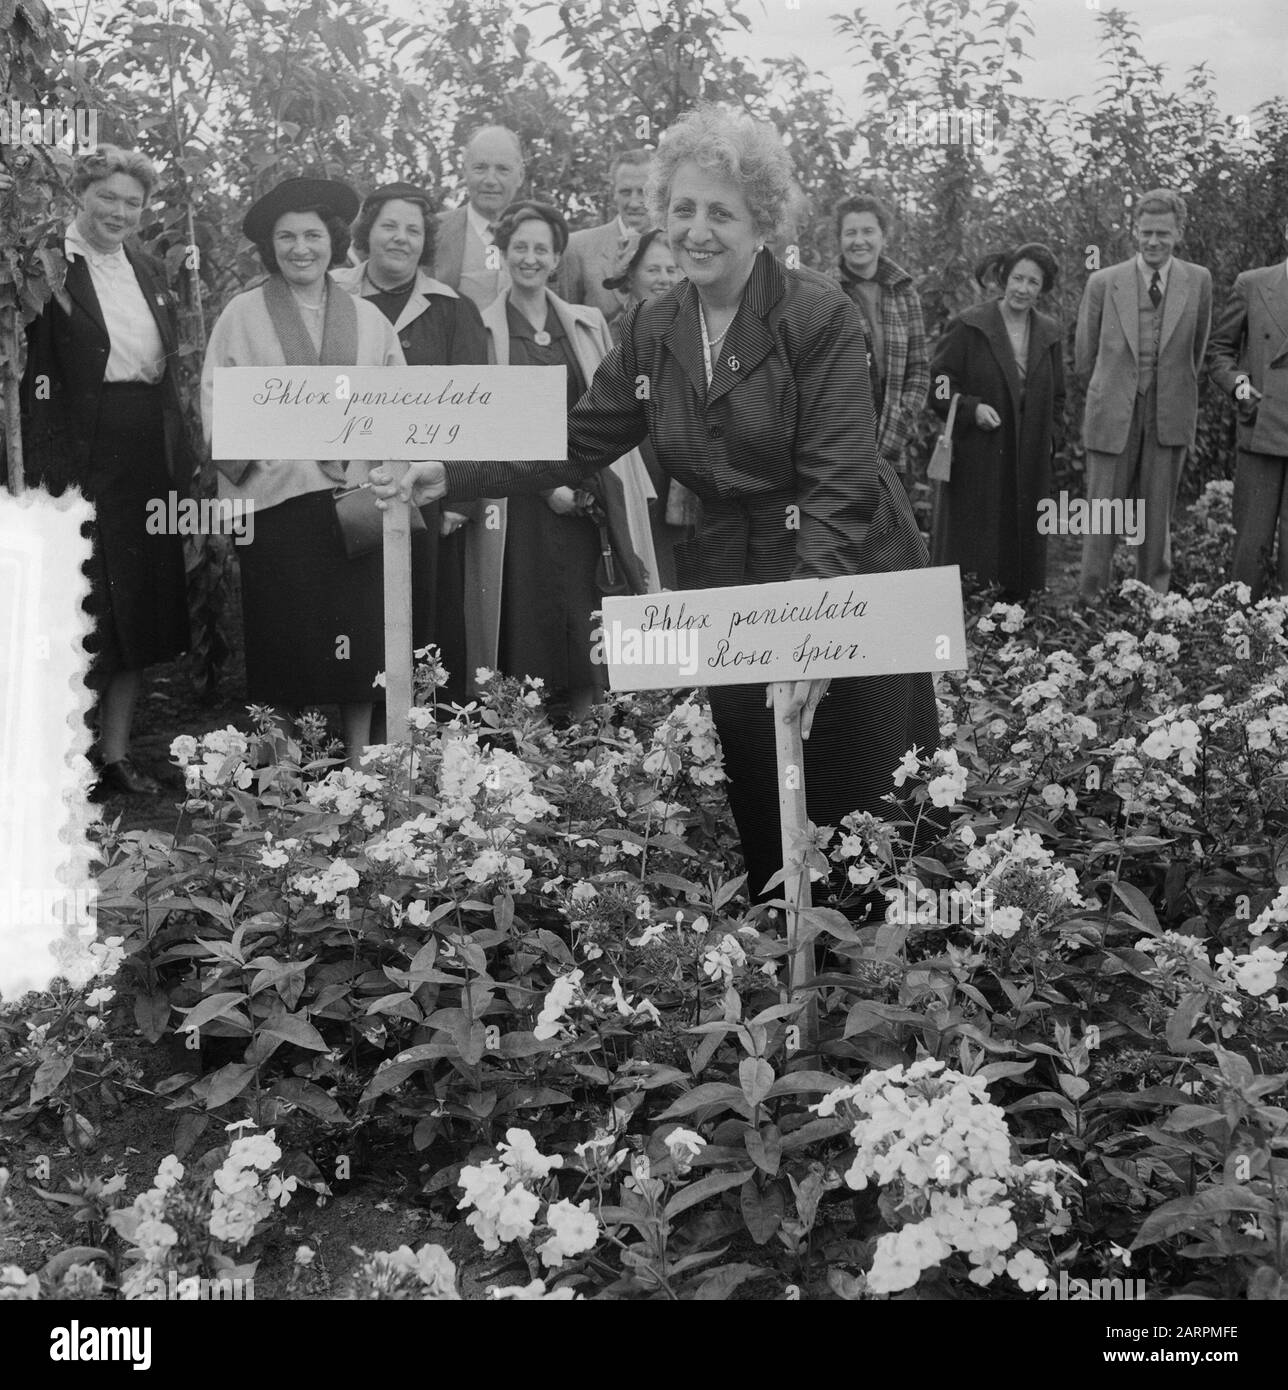 A phlox is named after harpist Rosa Spier, t.g.v. her 60th birthday Annotation: The event took place in the Royal Nurseries Moerhei in Dedemsvaart Date: 11 September 1952 Location: Dedemsvaart, Overijssel Keywords: musicians, plants, birthdays Personal name: Spier, Rosa Stock Photo